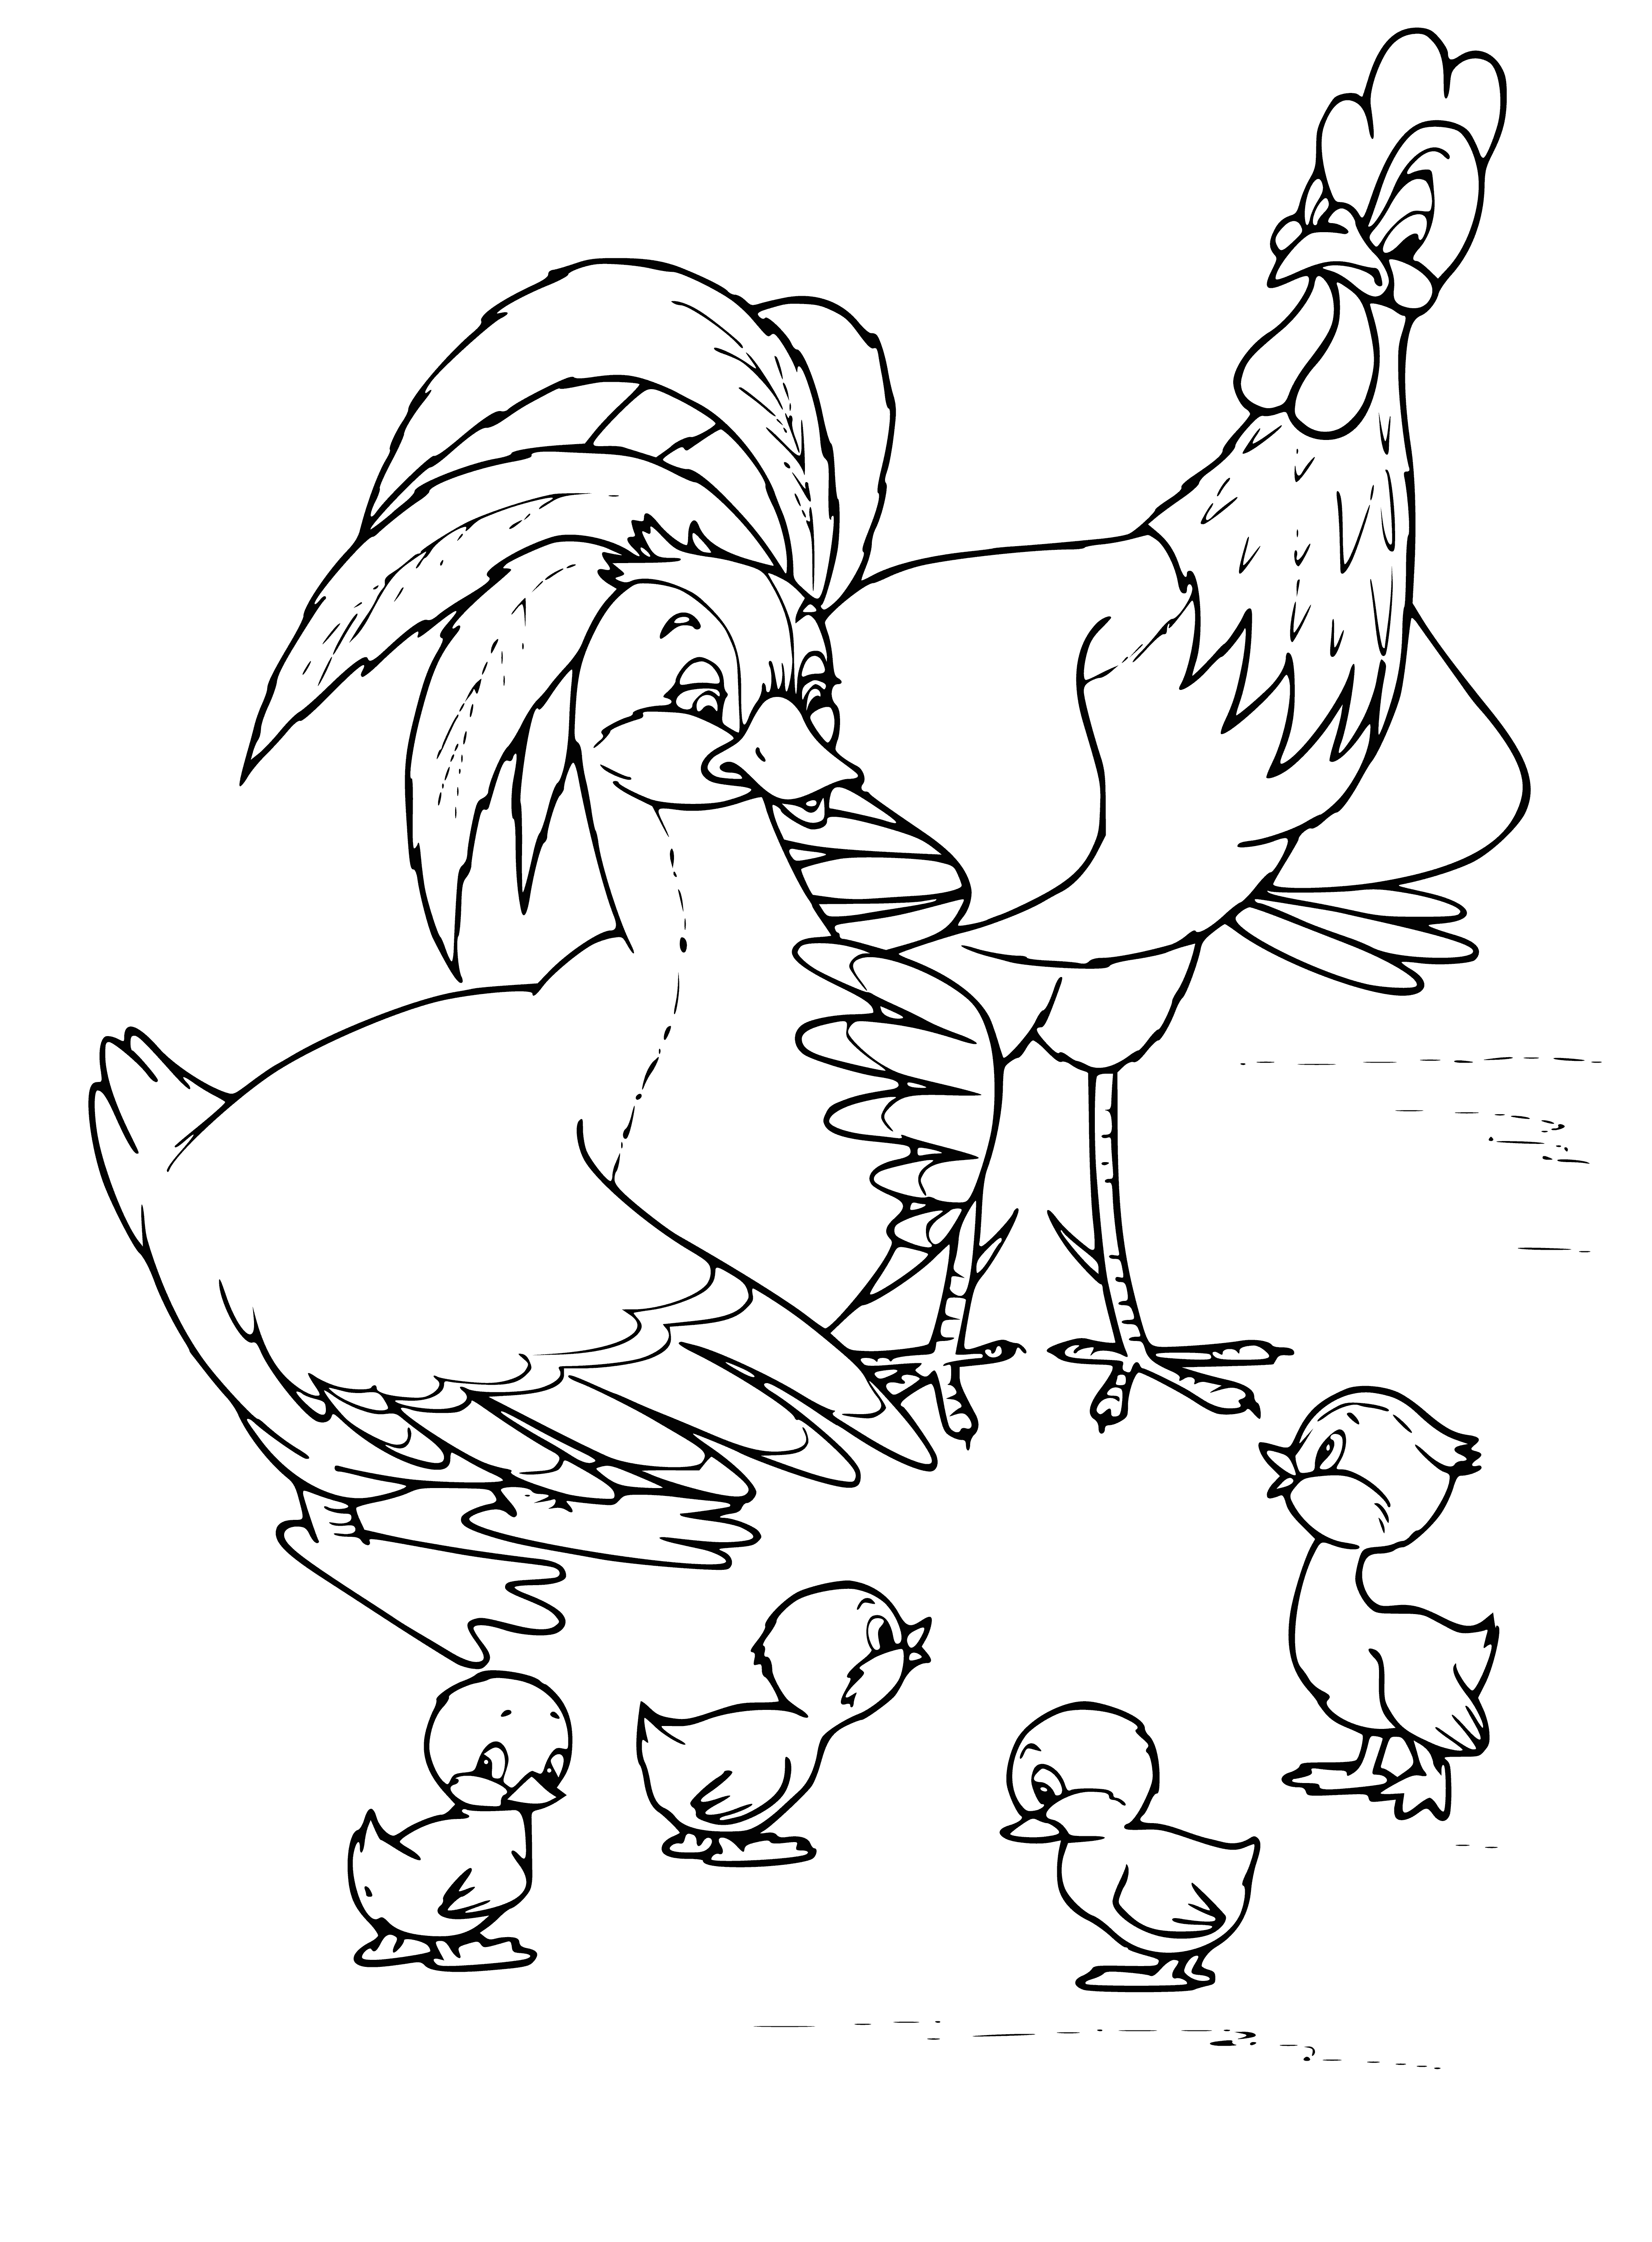 Duckling in the birdhouses coloring page